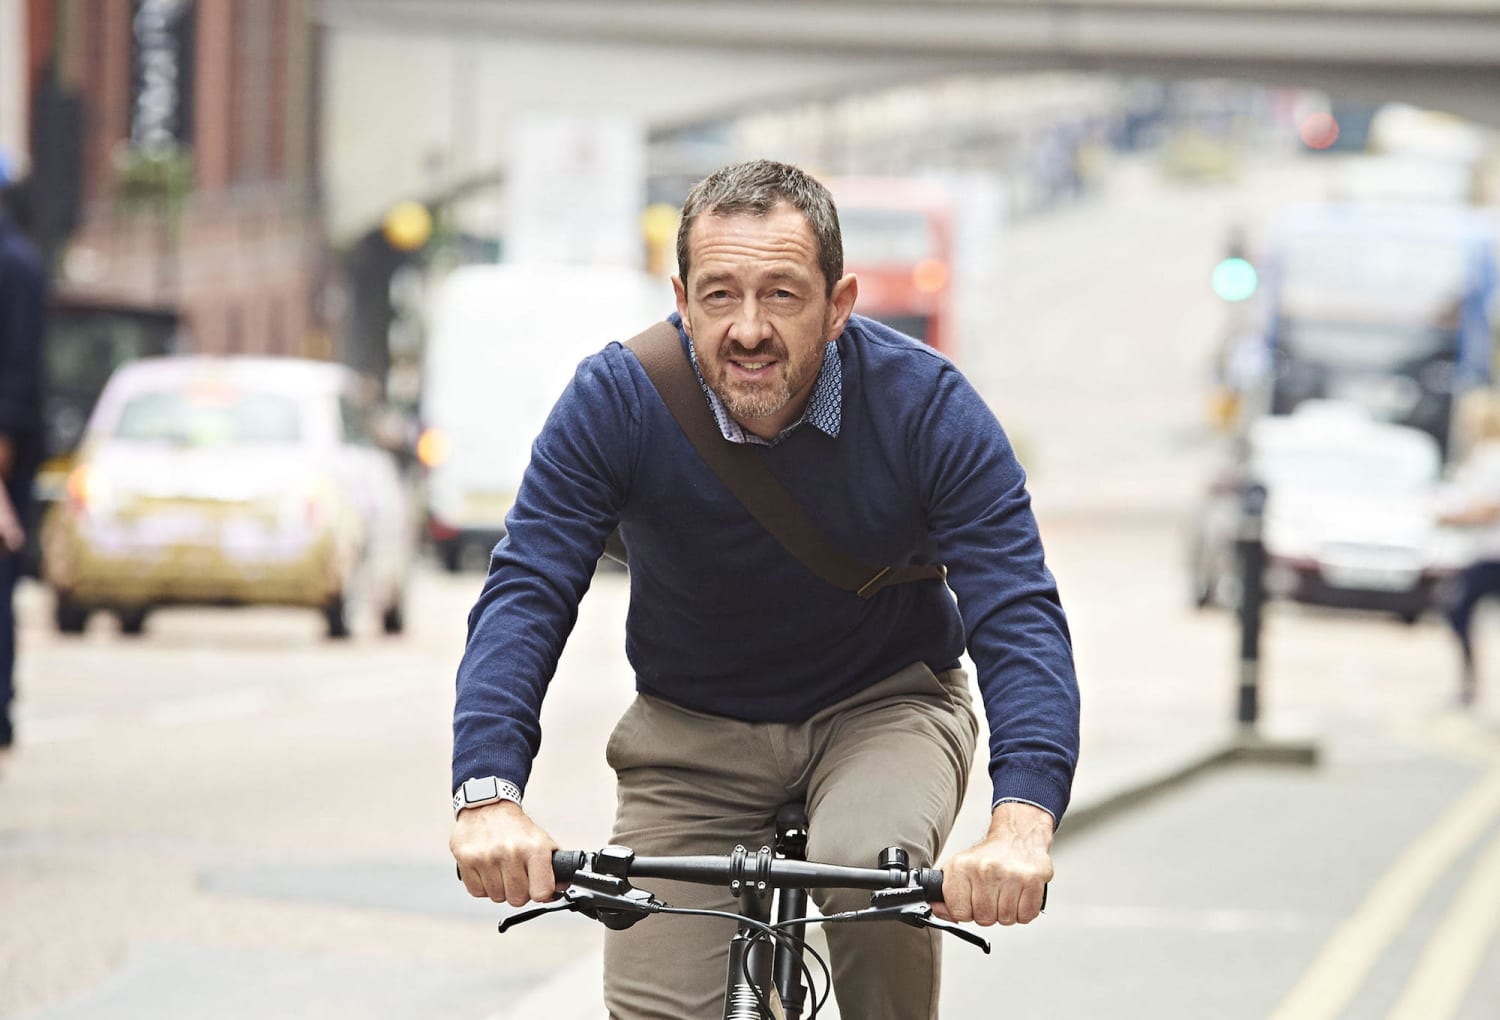 Chris Boardman goes car-free and is helping out at Halfords during lockdown